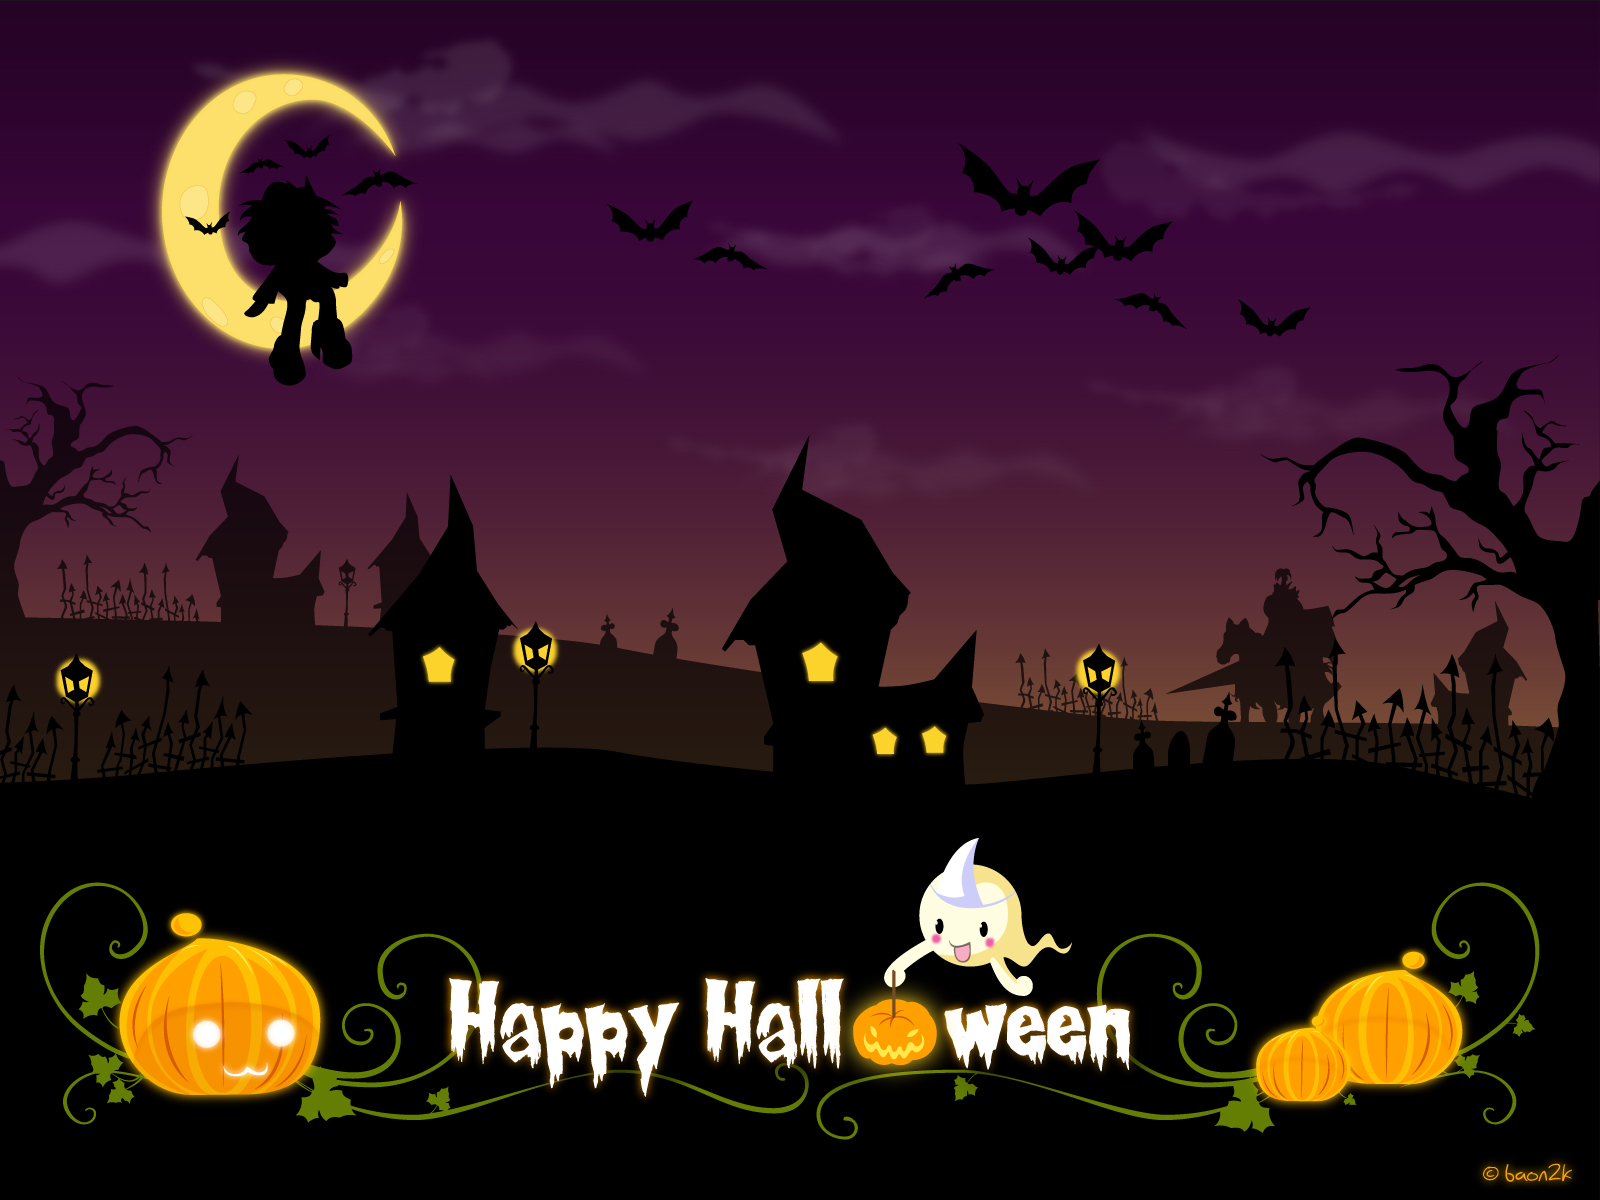 Cute Wallpaper With Halloween Theme Background Scary Creepy Cat  Background Image And Wallpaper for Free Download